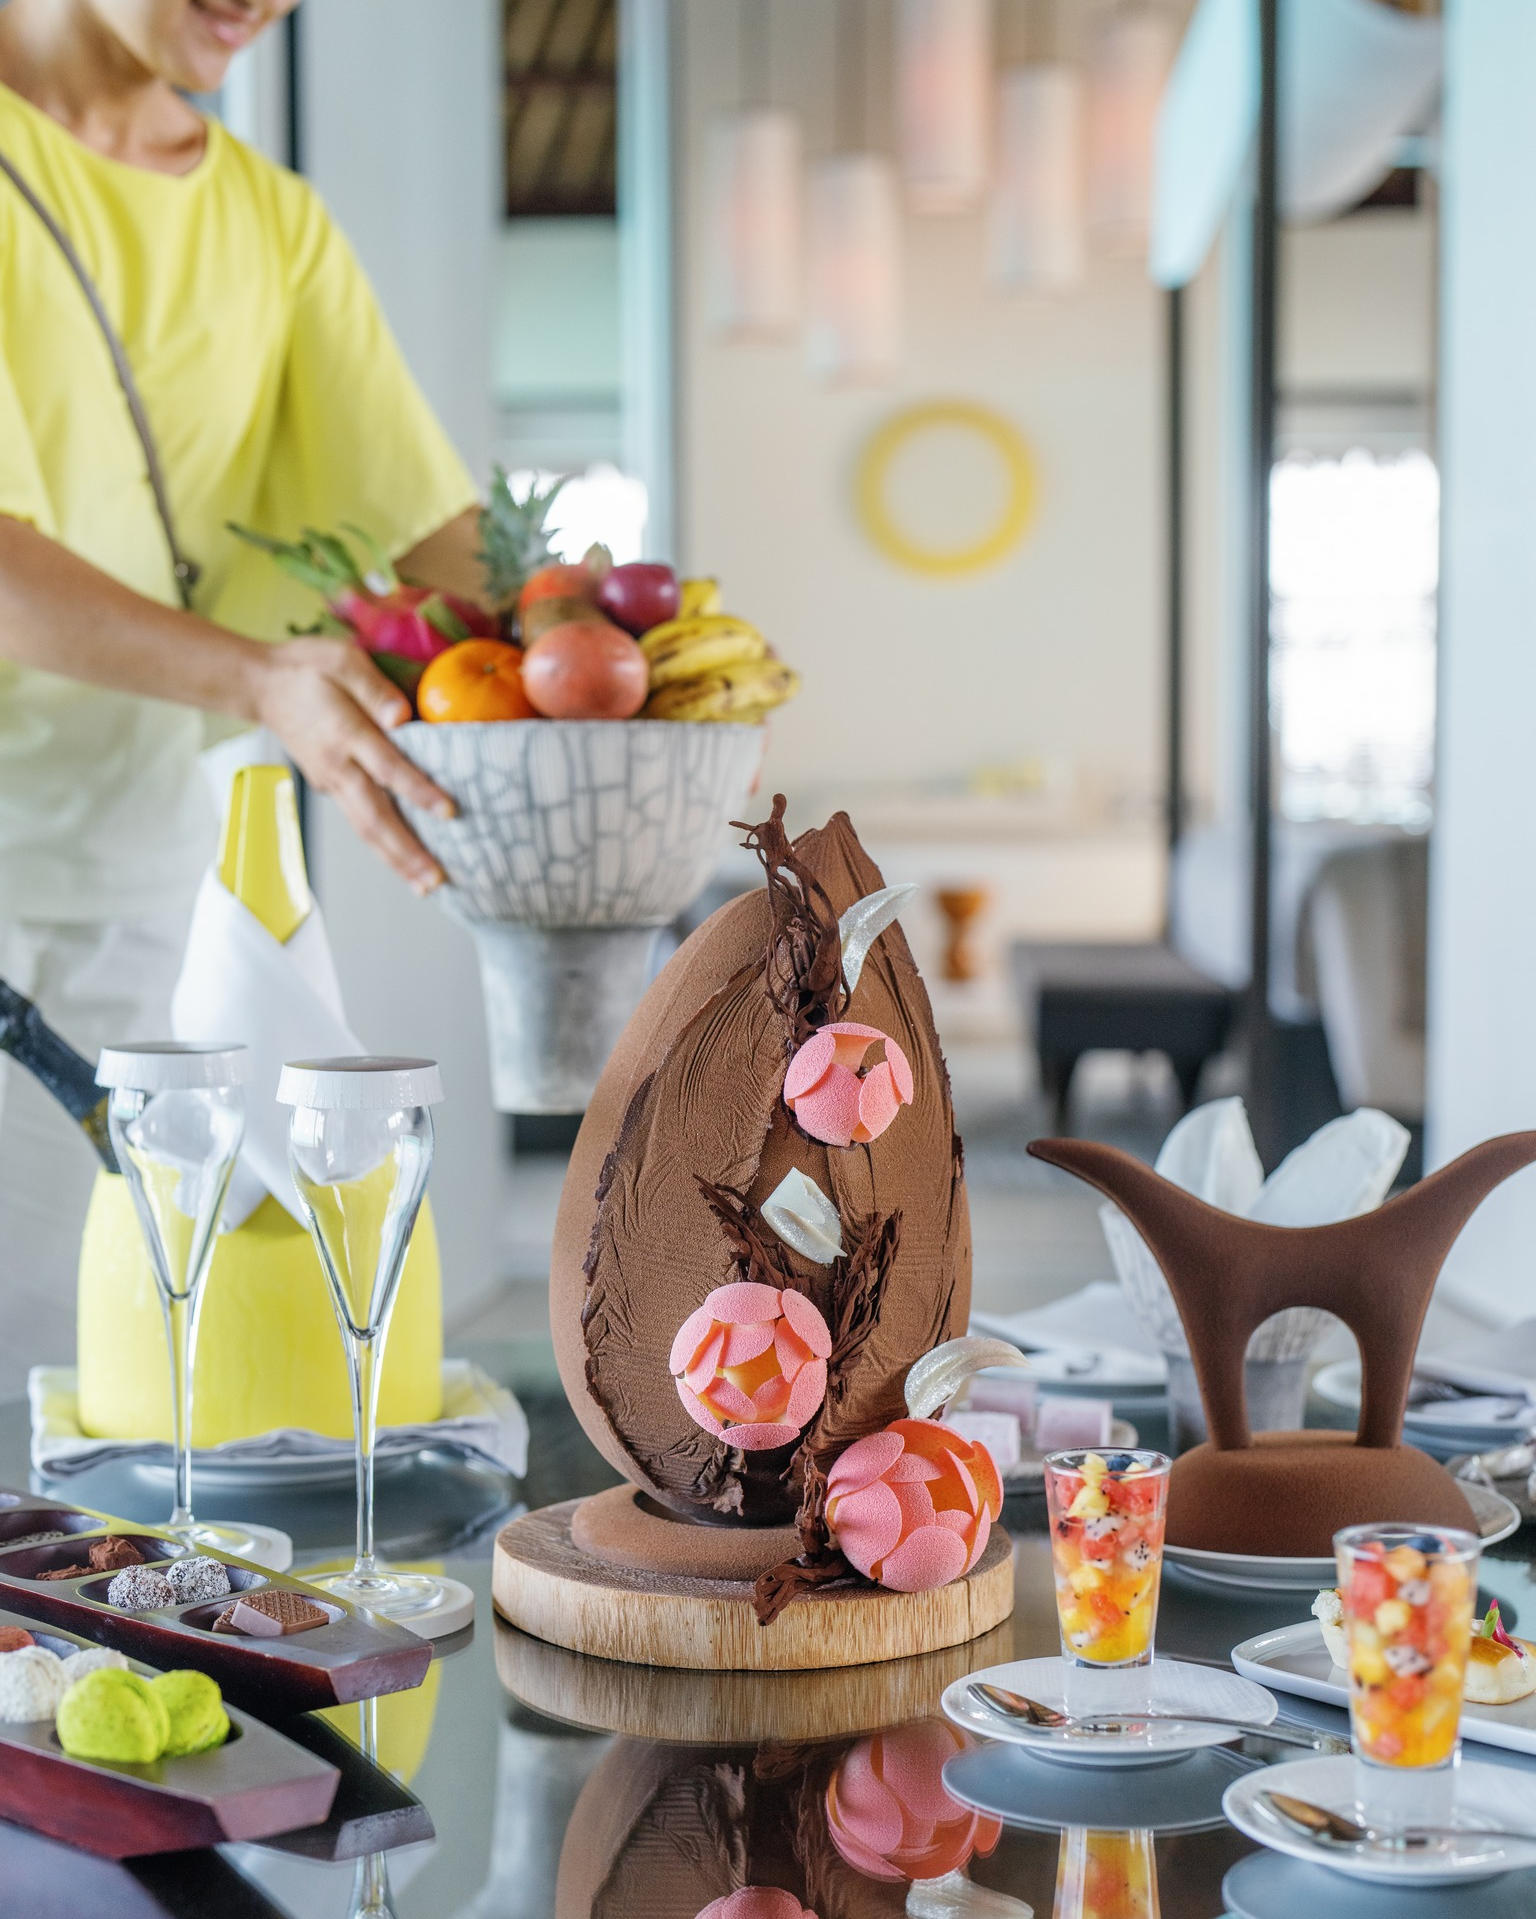 Cheval Blanc Randheli wishes you a delicious Easter